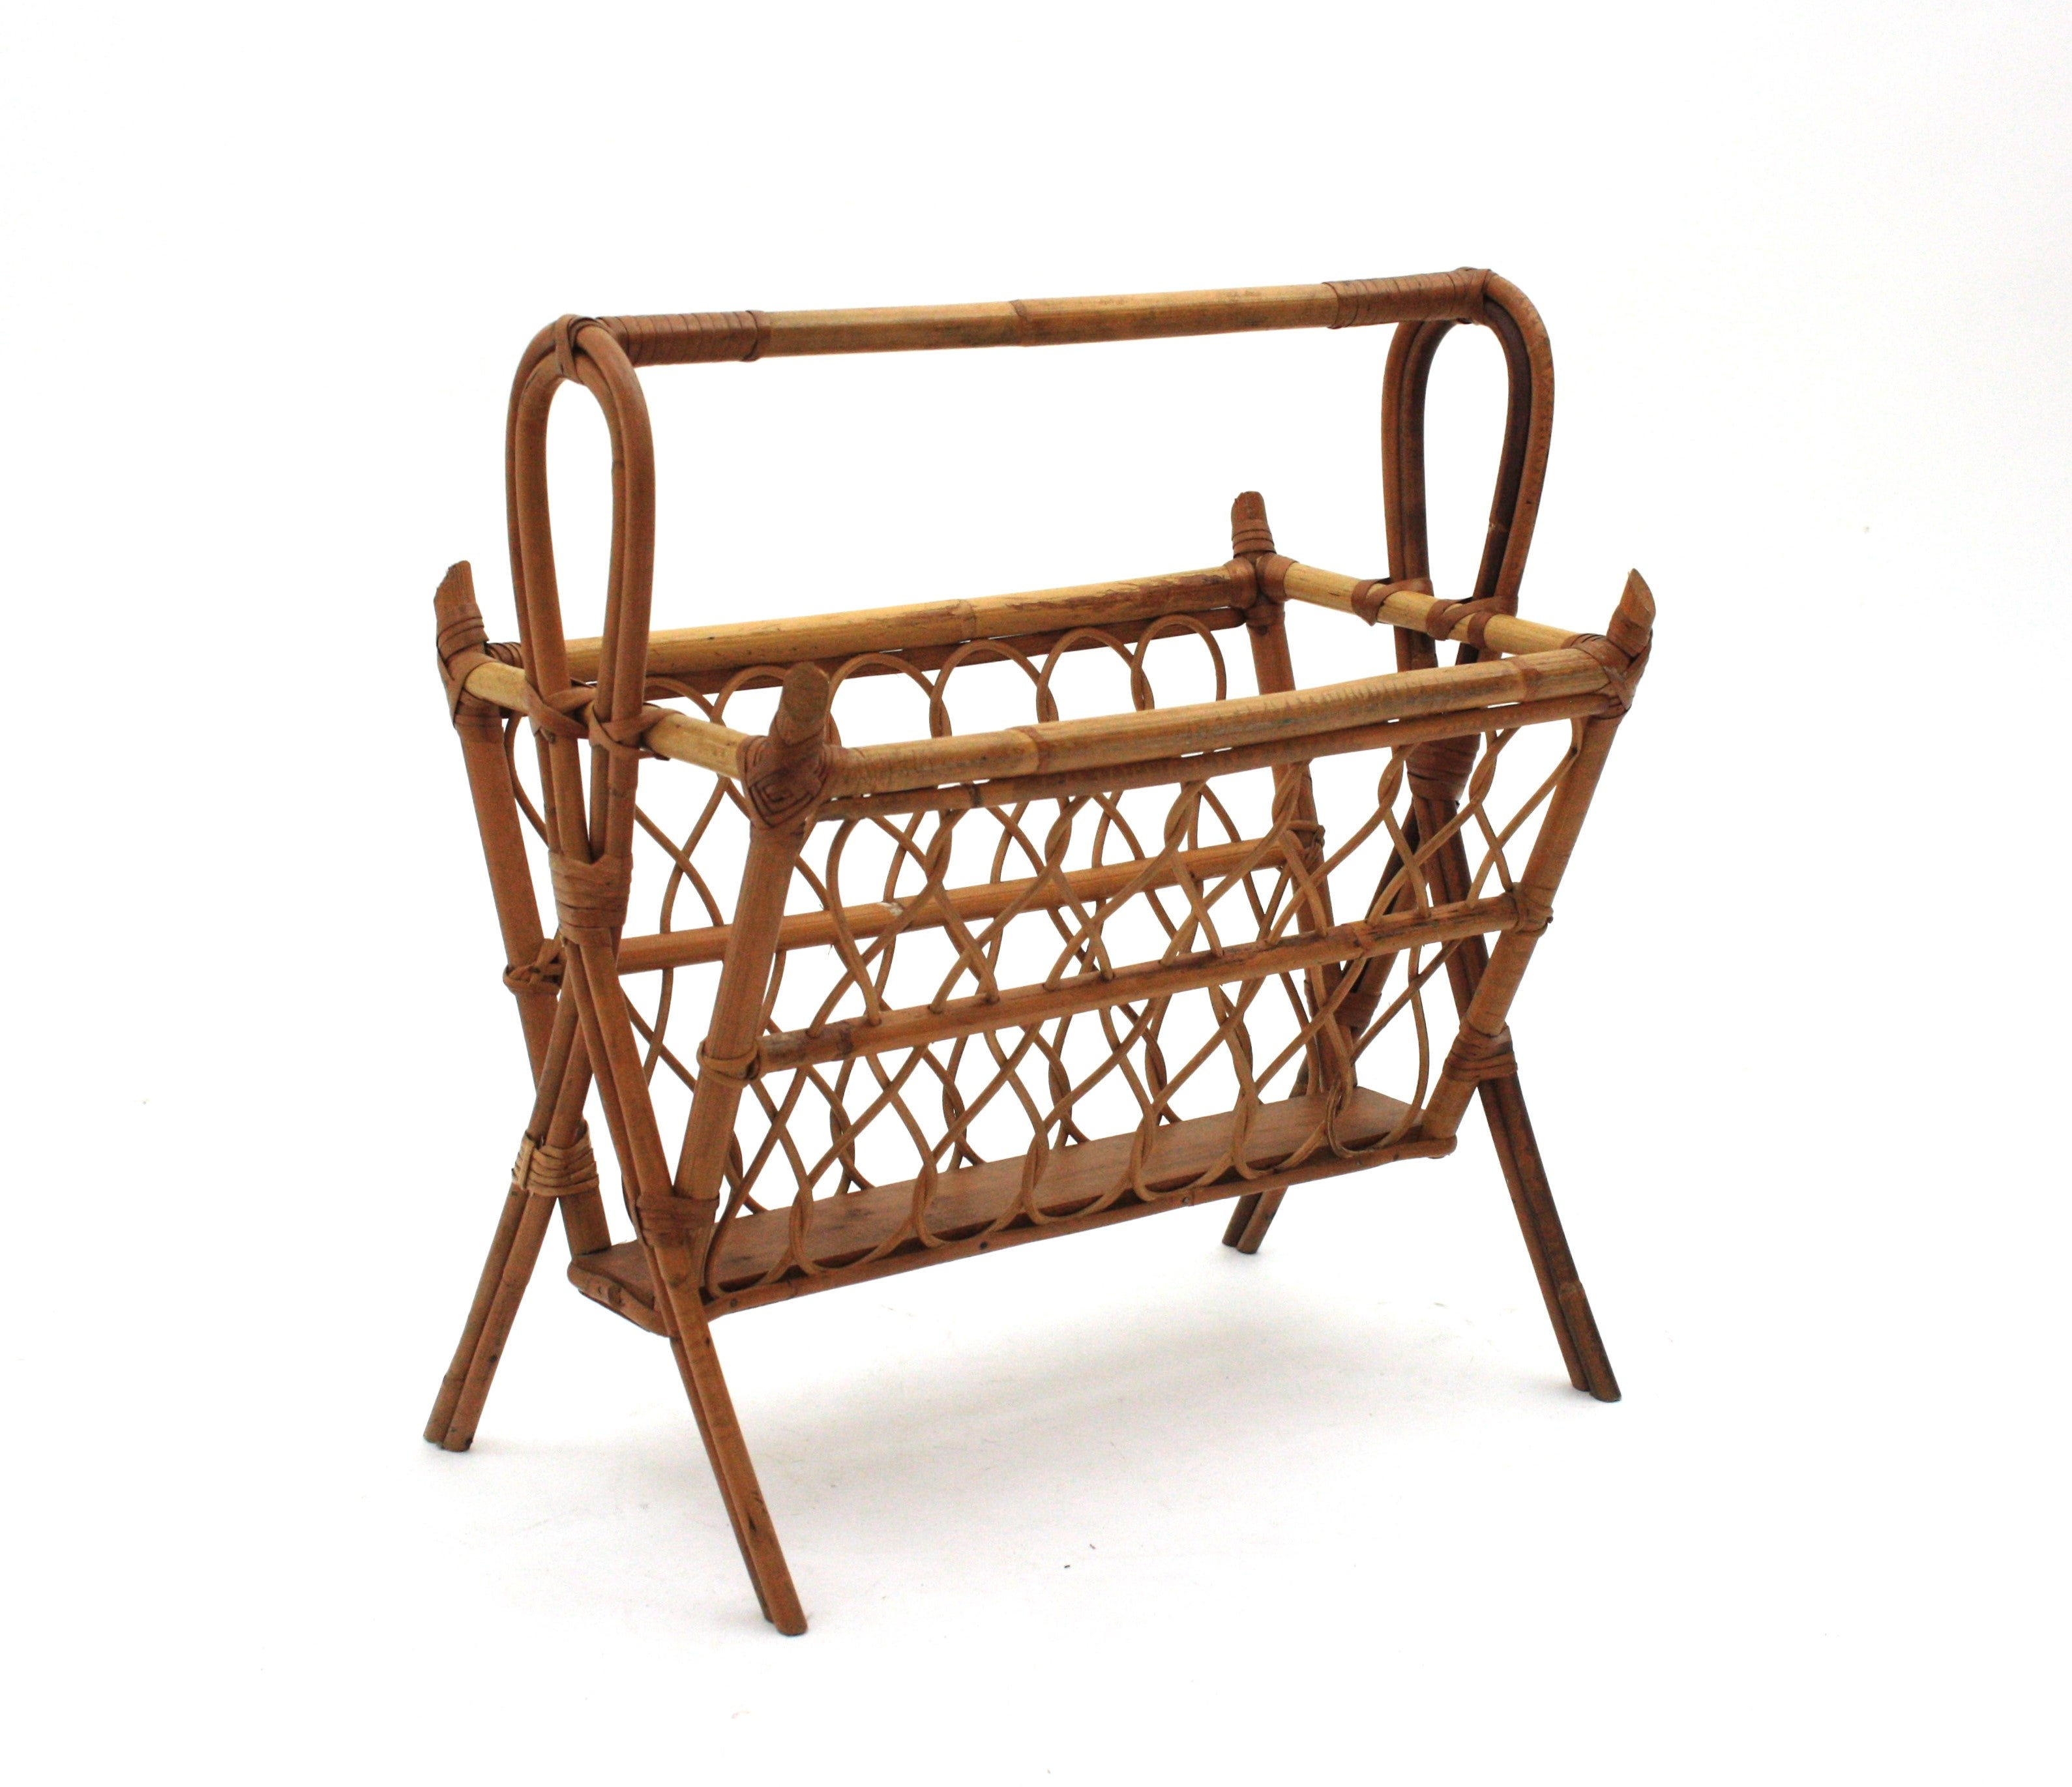 Mid-Century Modern Rattan Magazine Rack
Eye-catching handcrafted bamboo and rattan basket magazine rack in the manner of Franco Albini, Italy, 1960s.
This magazine stand features a conical bamboo basket with rattan loop decorations. 
Stylish from